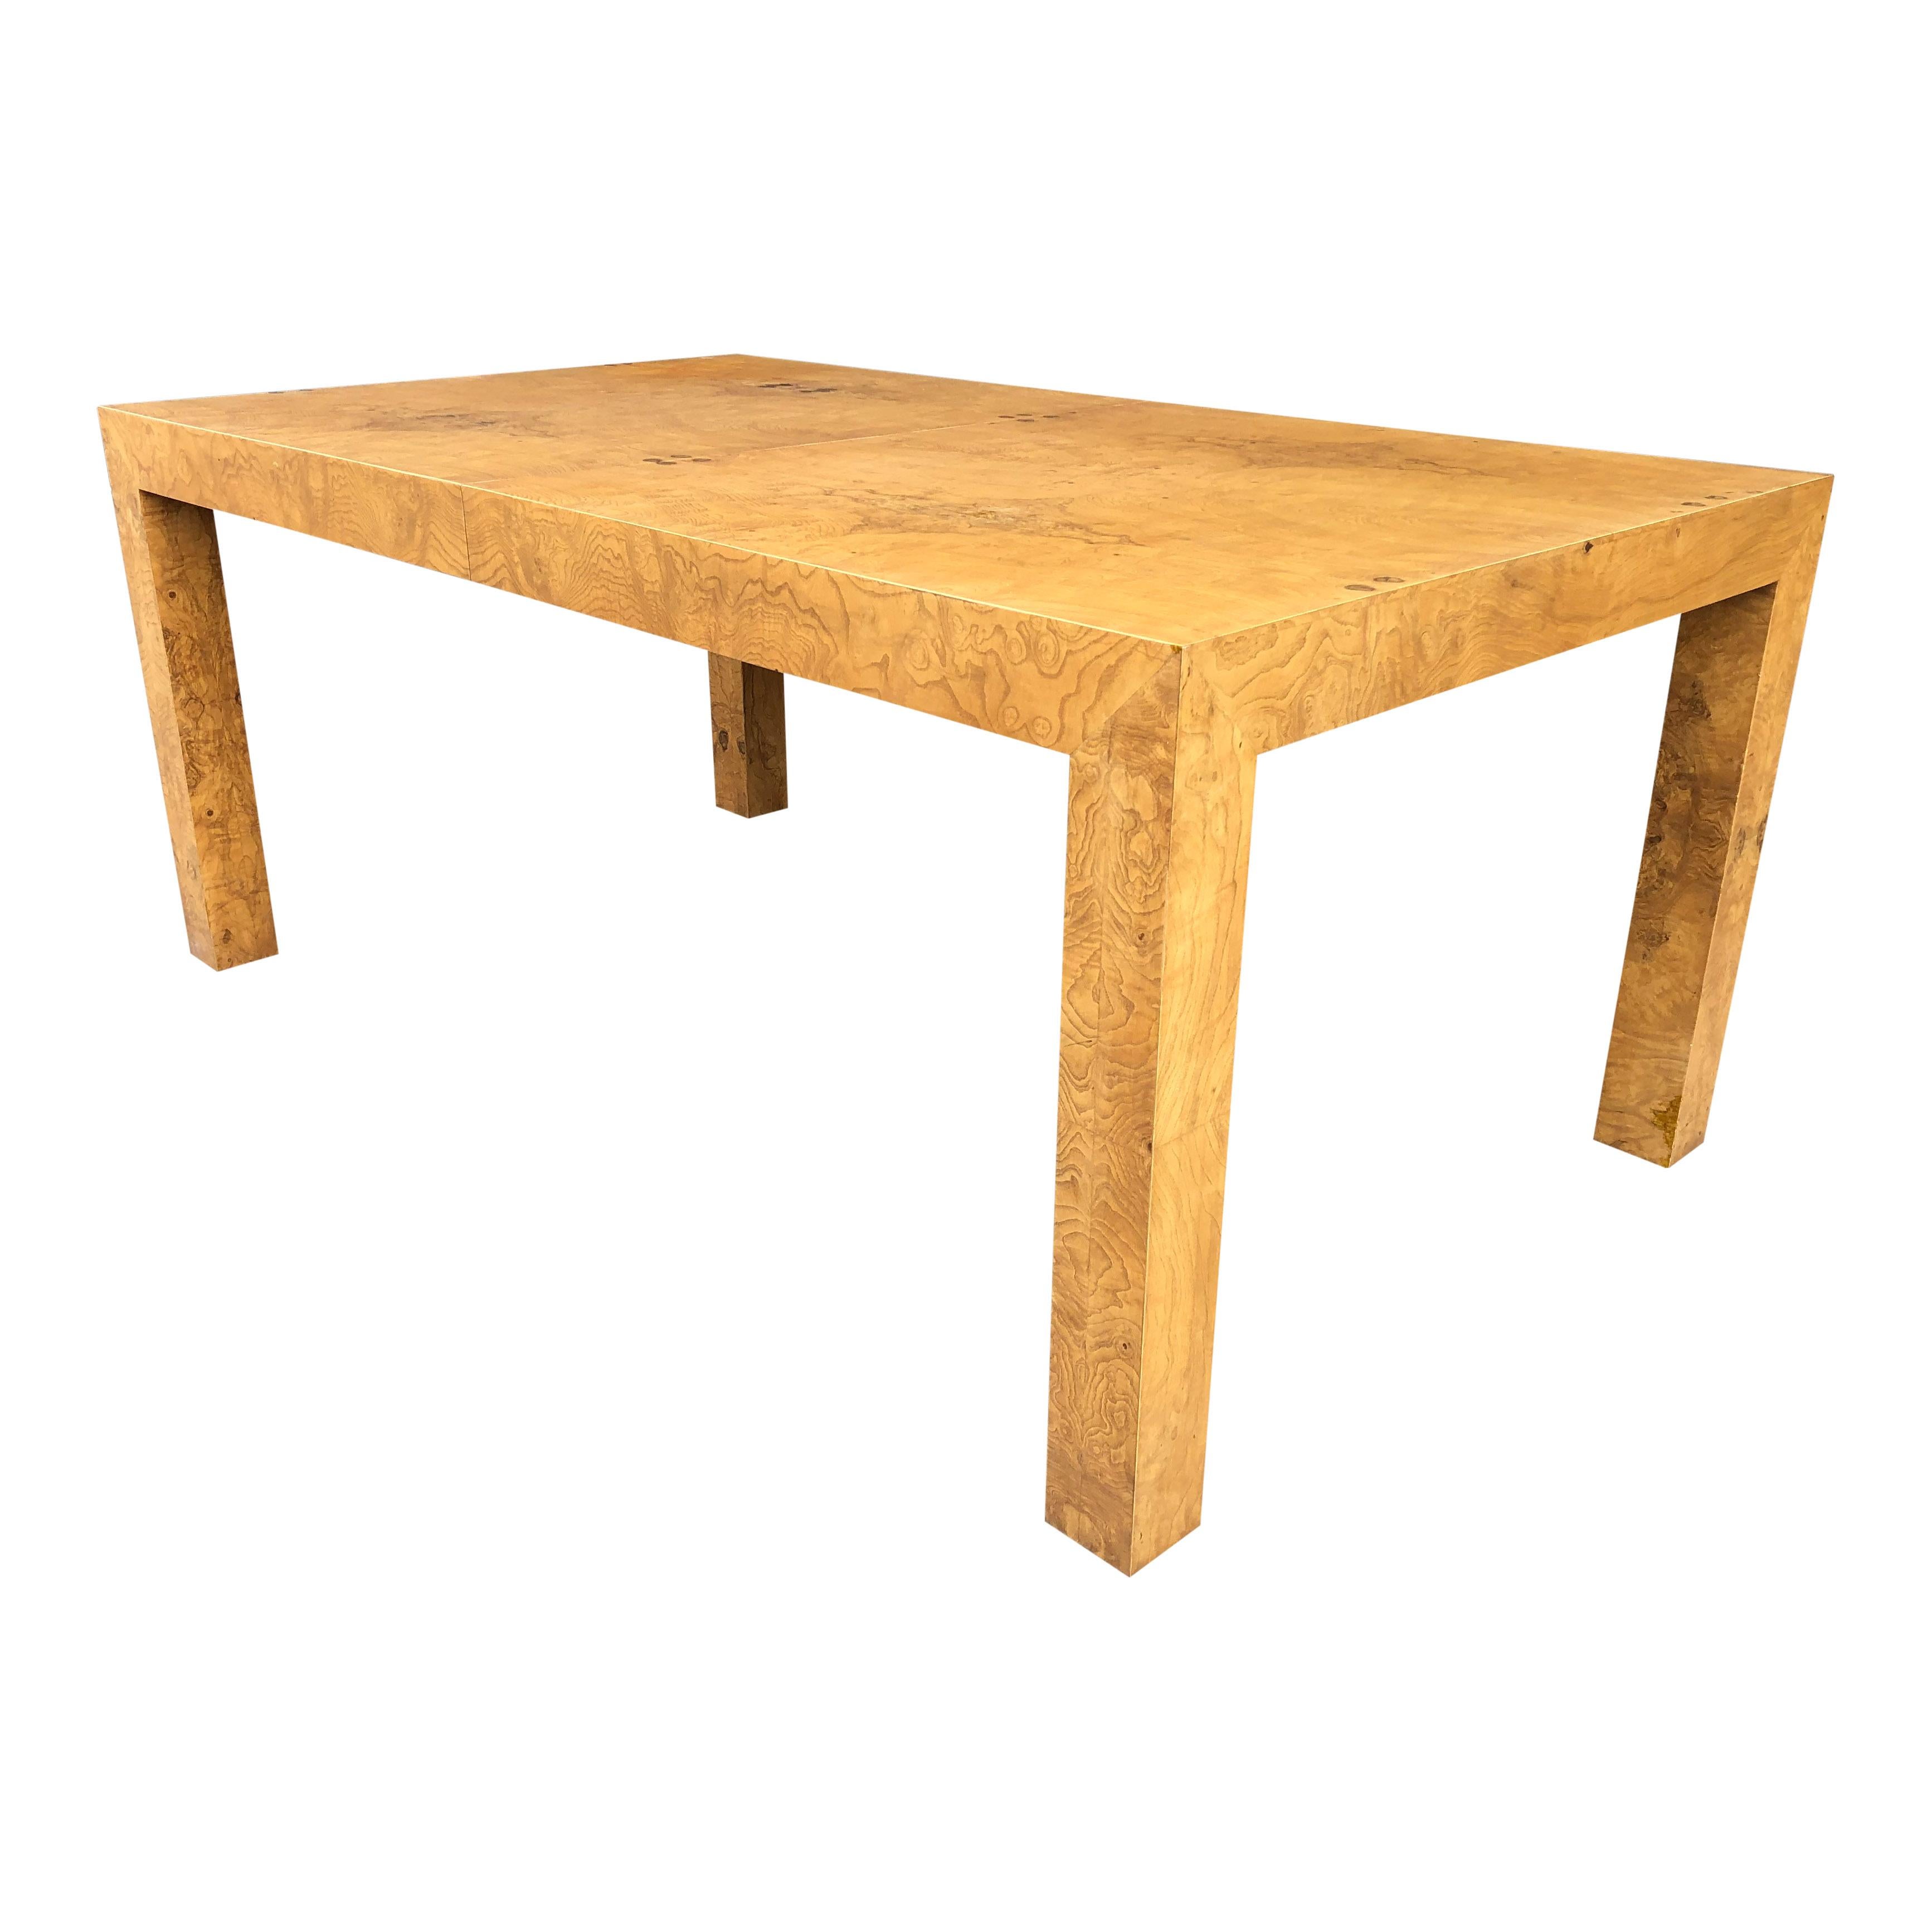 A perfectly-proportioned Parsons table by Milo Baughman, with two extension leaves. Highly figured burled olive wood. A great piece to give some pop to any room.

The table is in excellent condition, recently restored.

Dimensions: 28'' high,